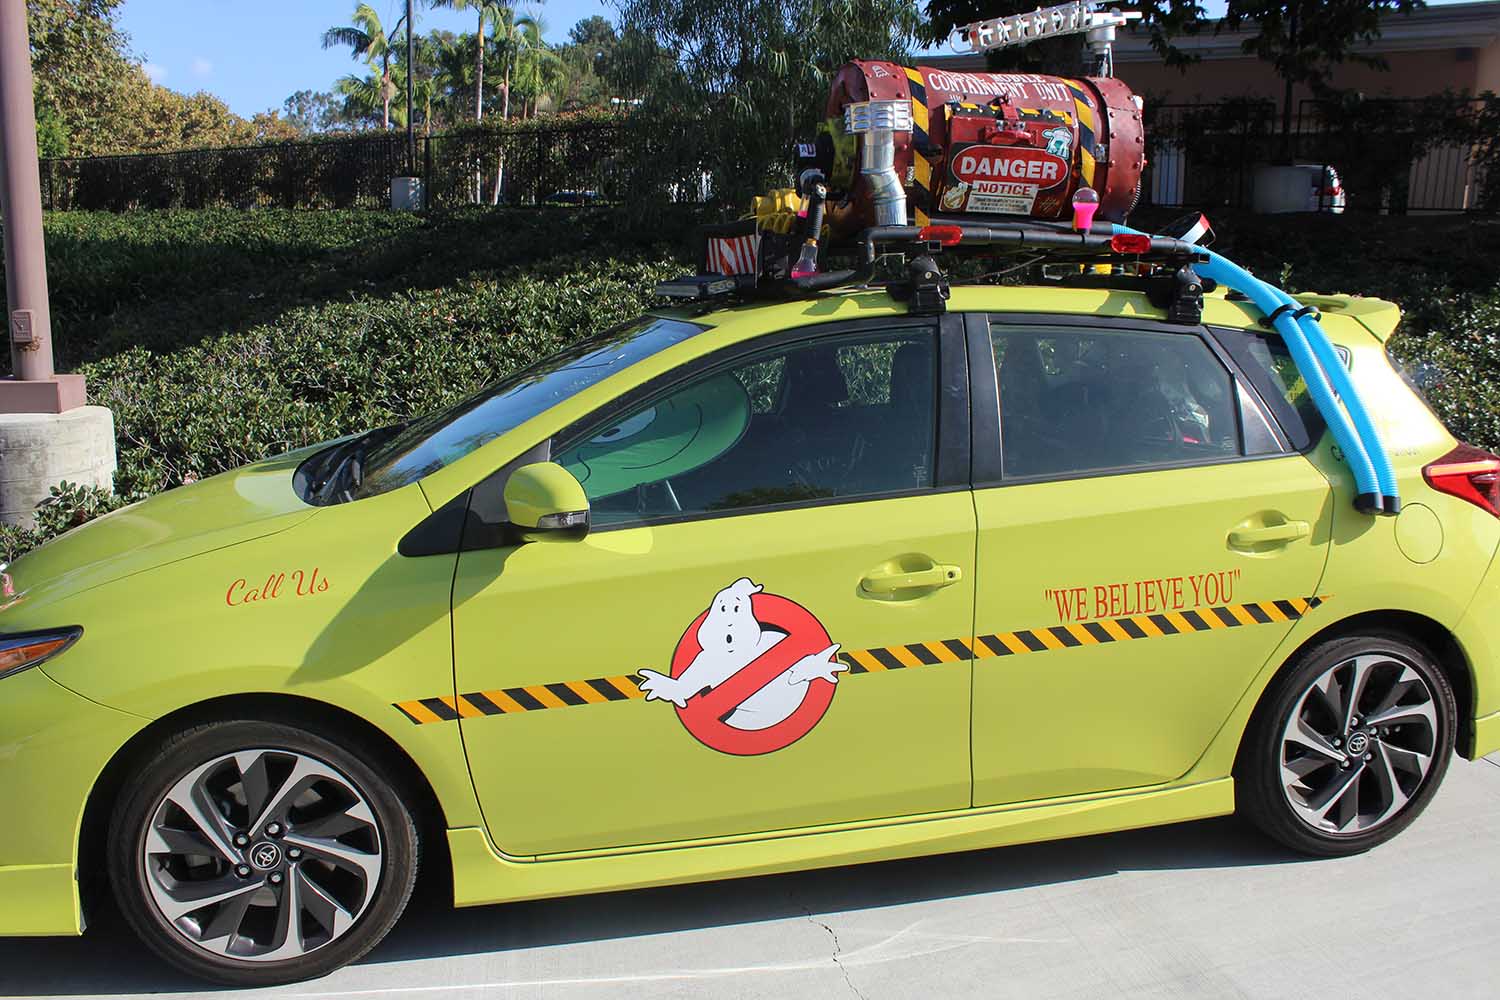 Ghostbuster of OC vehicle